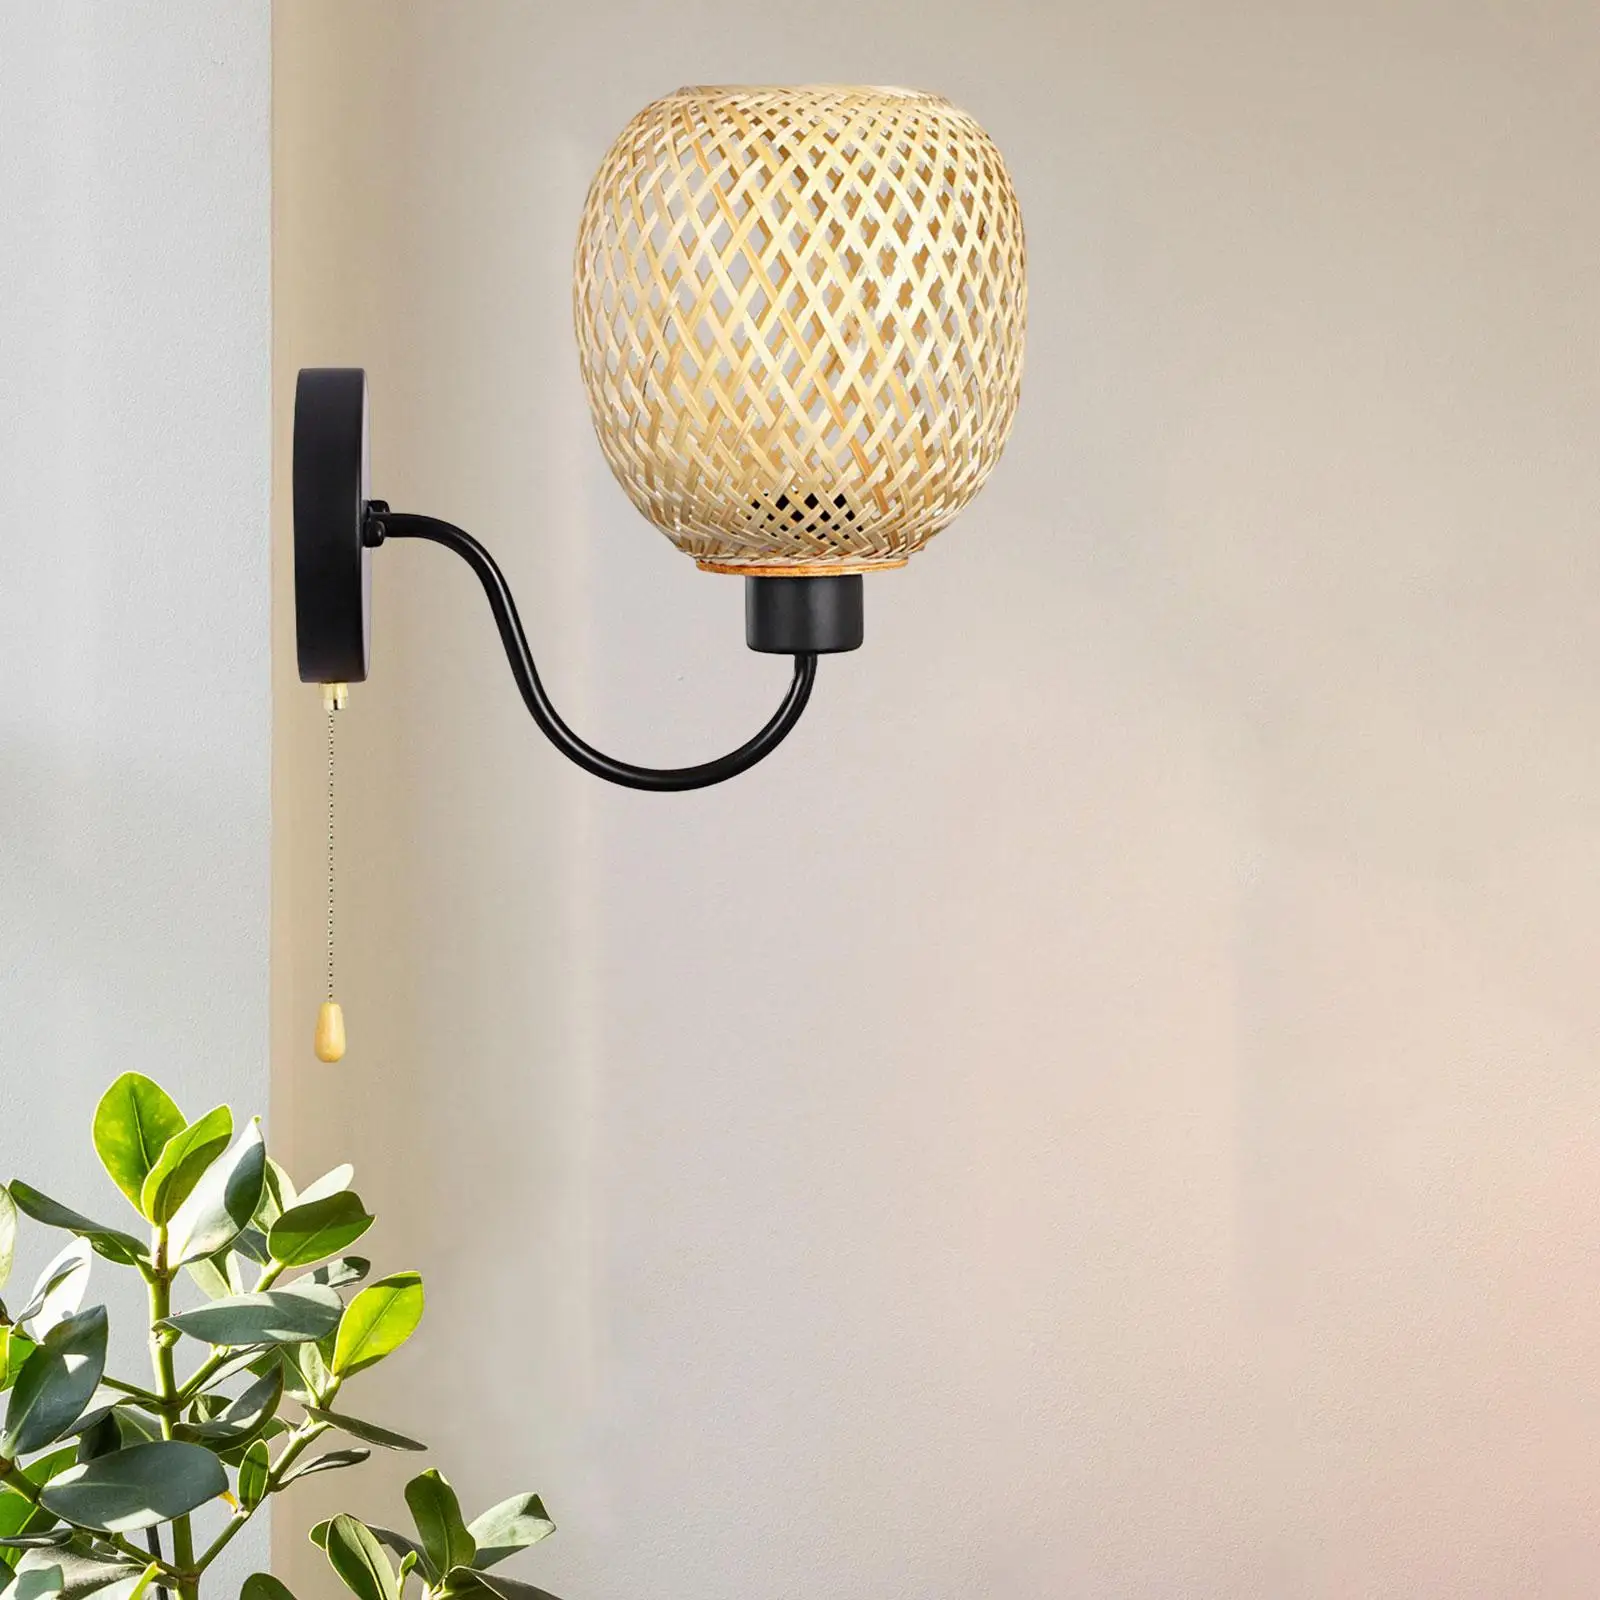 Antique style Lamp Shade E27 E26 Lampshade Rattan for Hallway